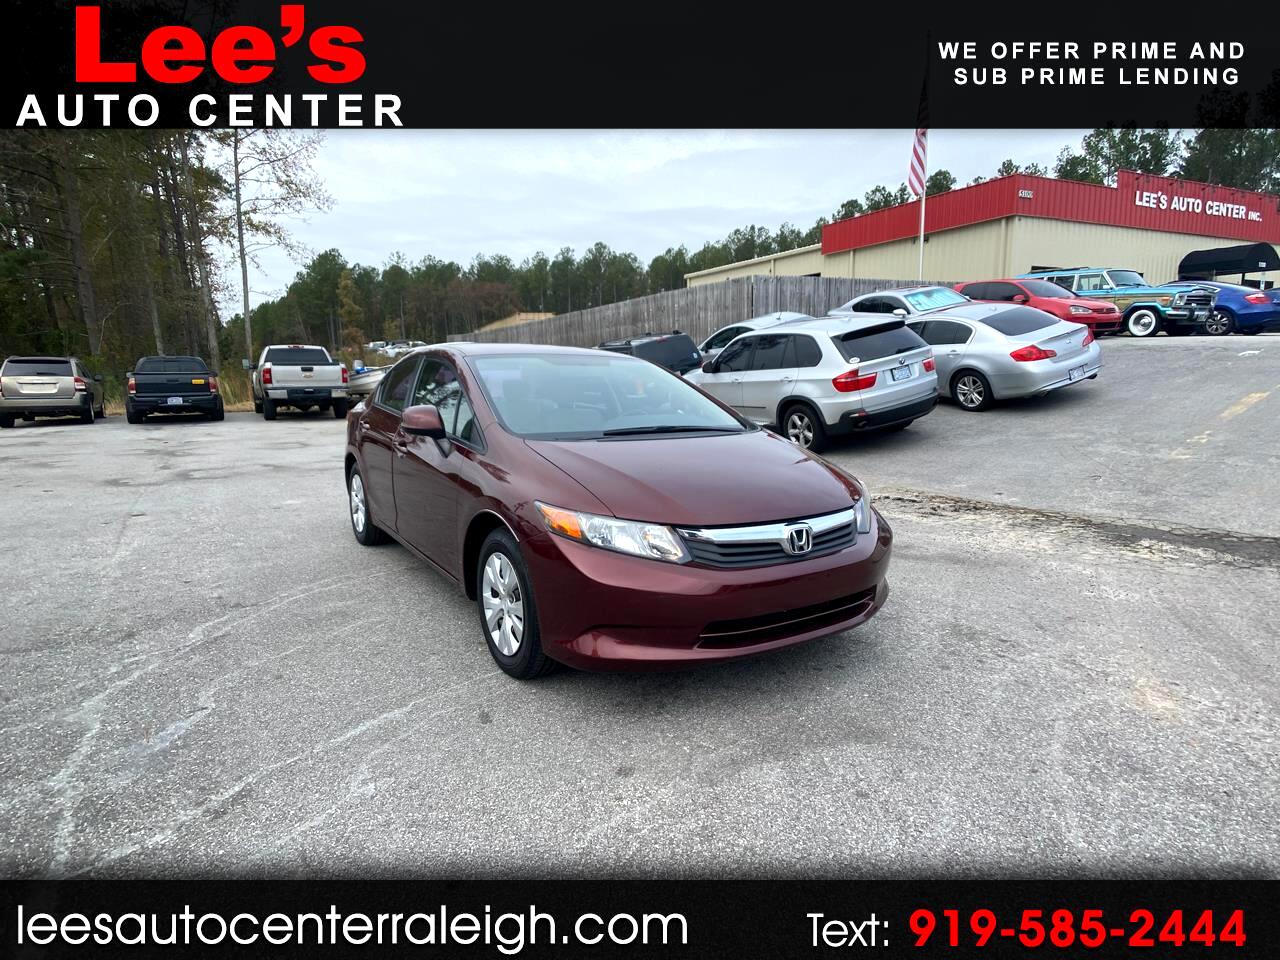 Used Cars For Sale Raleigh Nc 27603 Lee S Auto Center